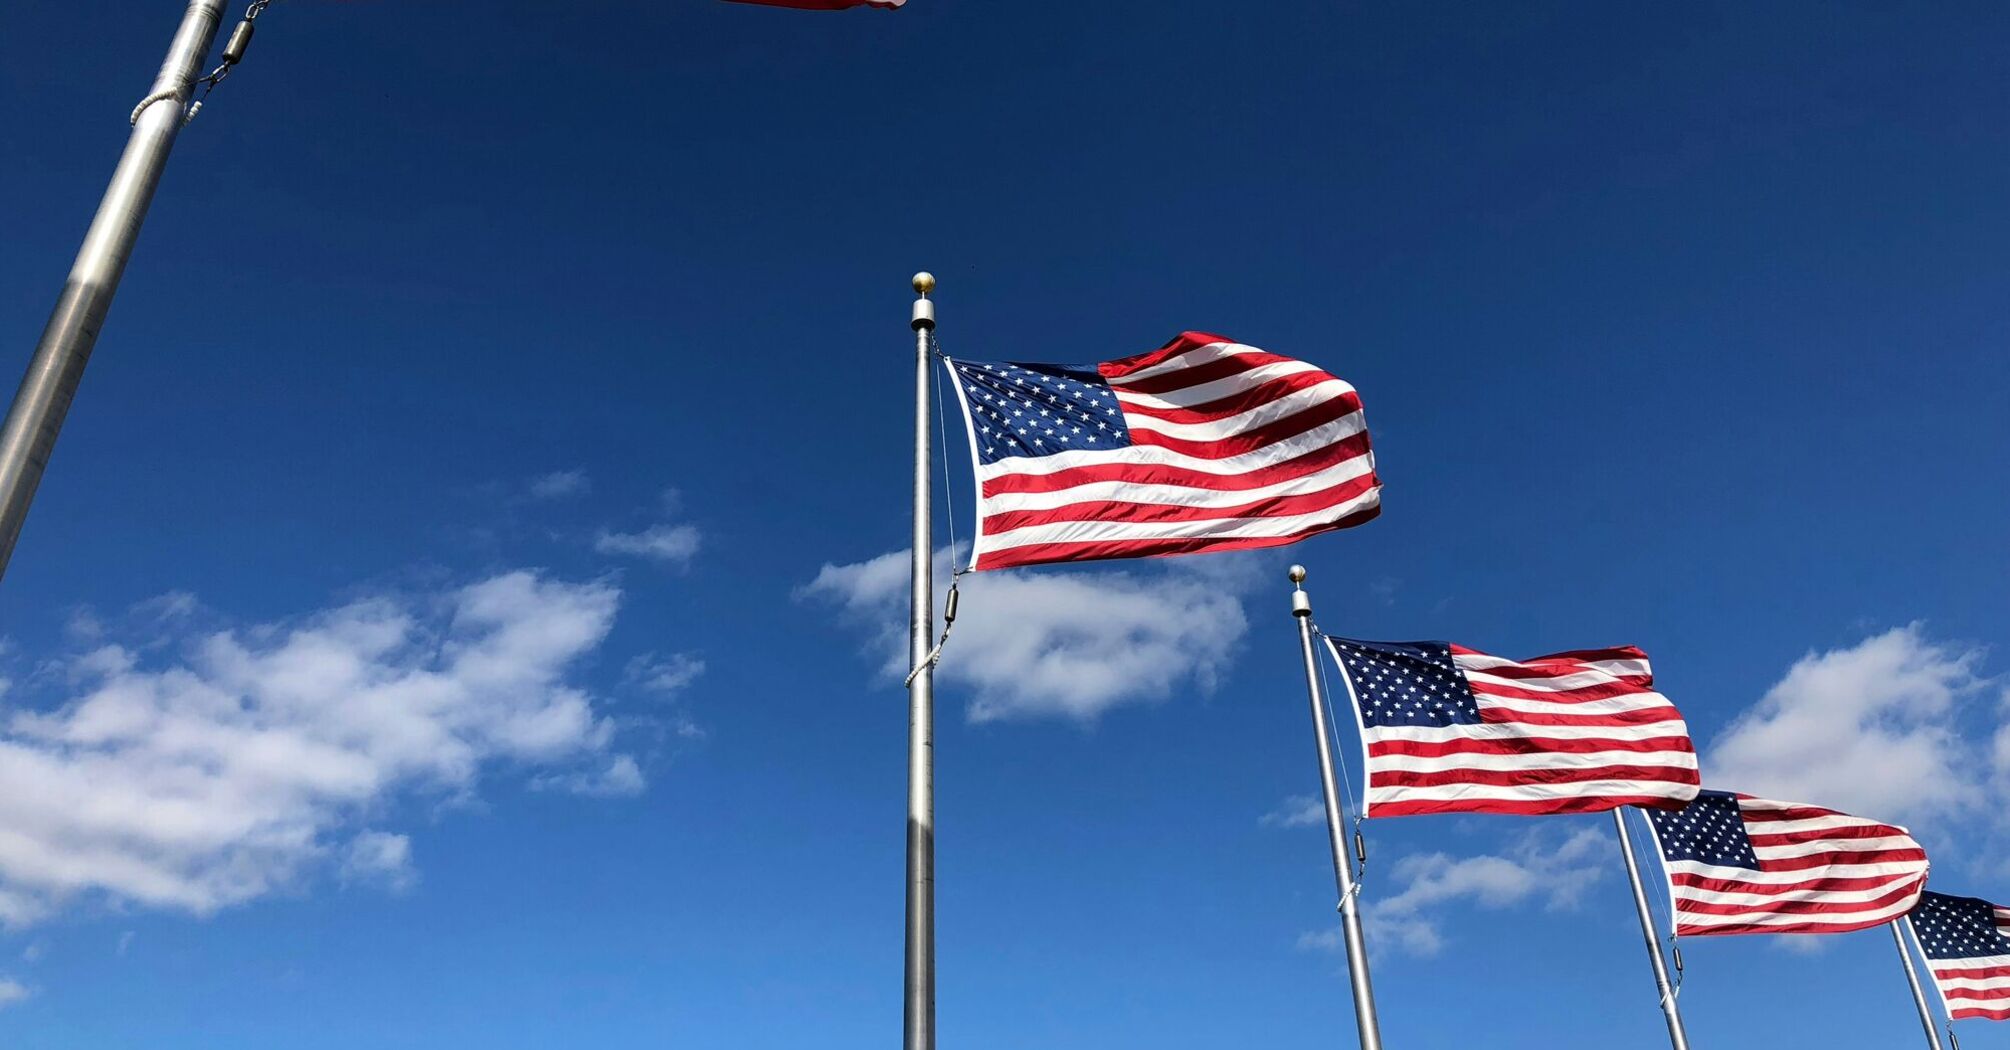 Multiple American flags on flagpoles against a blue sky with scattered clouds